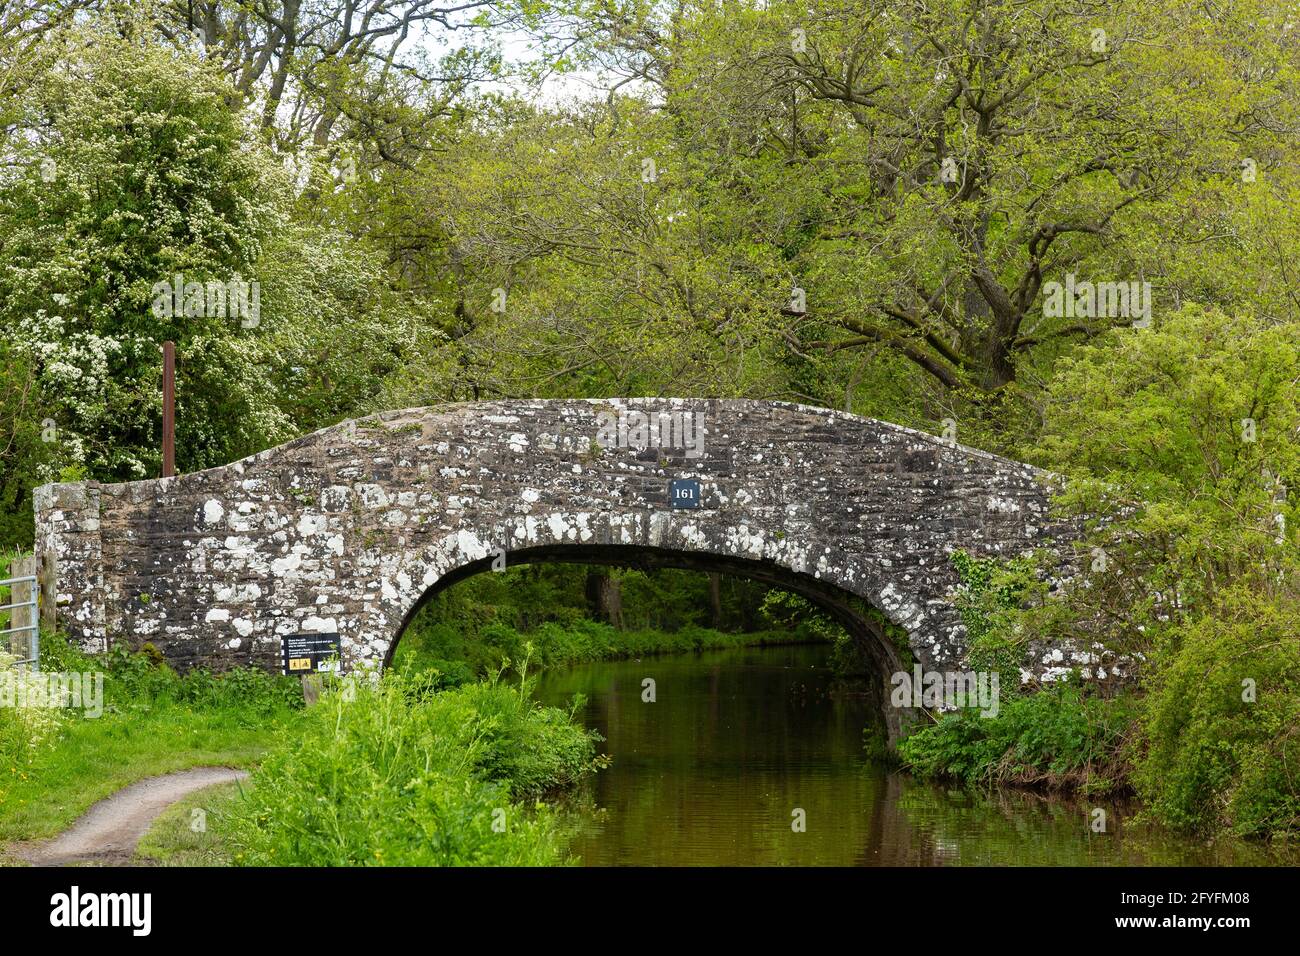 Bridge 161, near Brecon on the Monmouthshire and Brecon Canal, Powys, Wales, UK Stock Photo